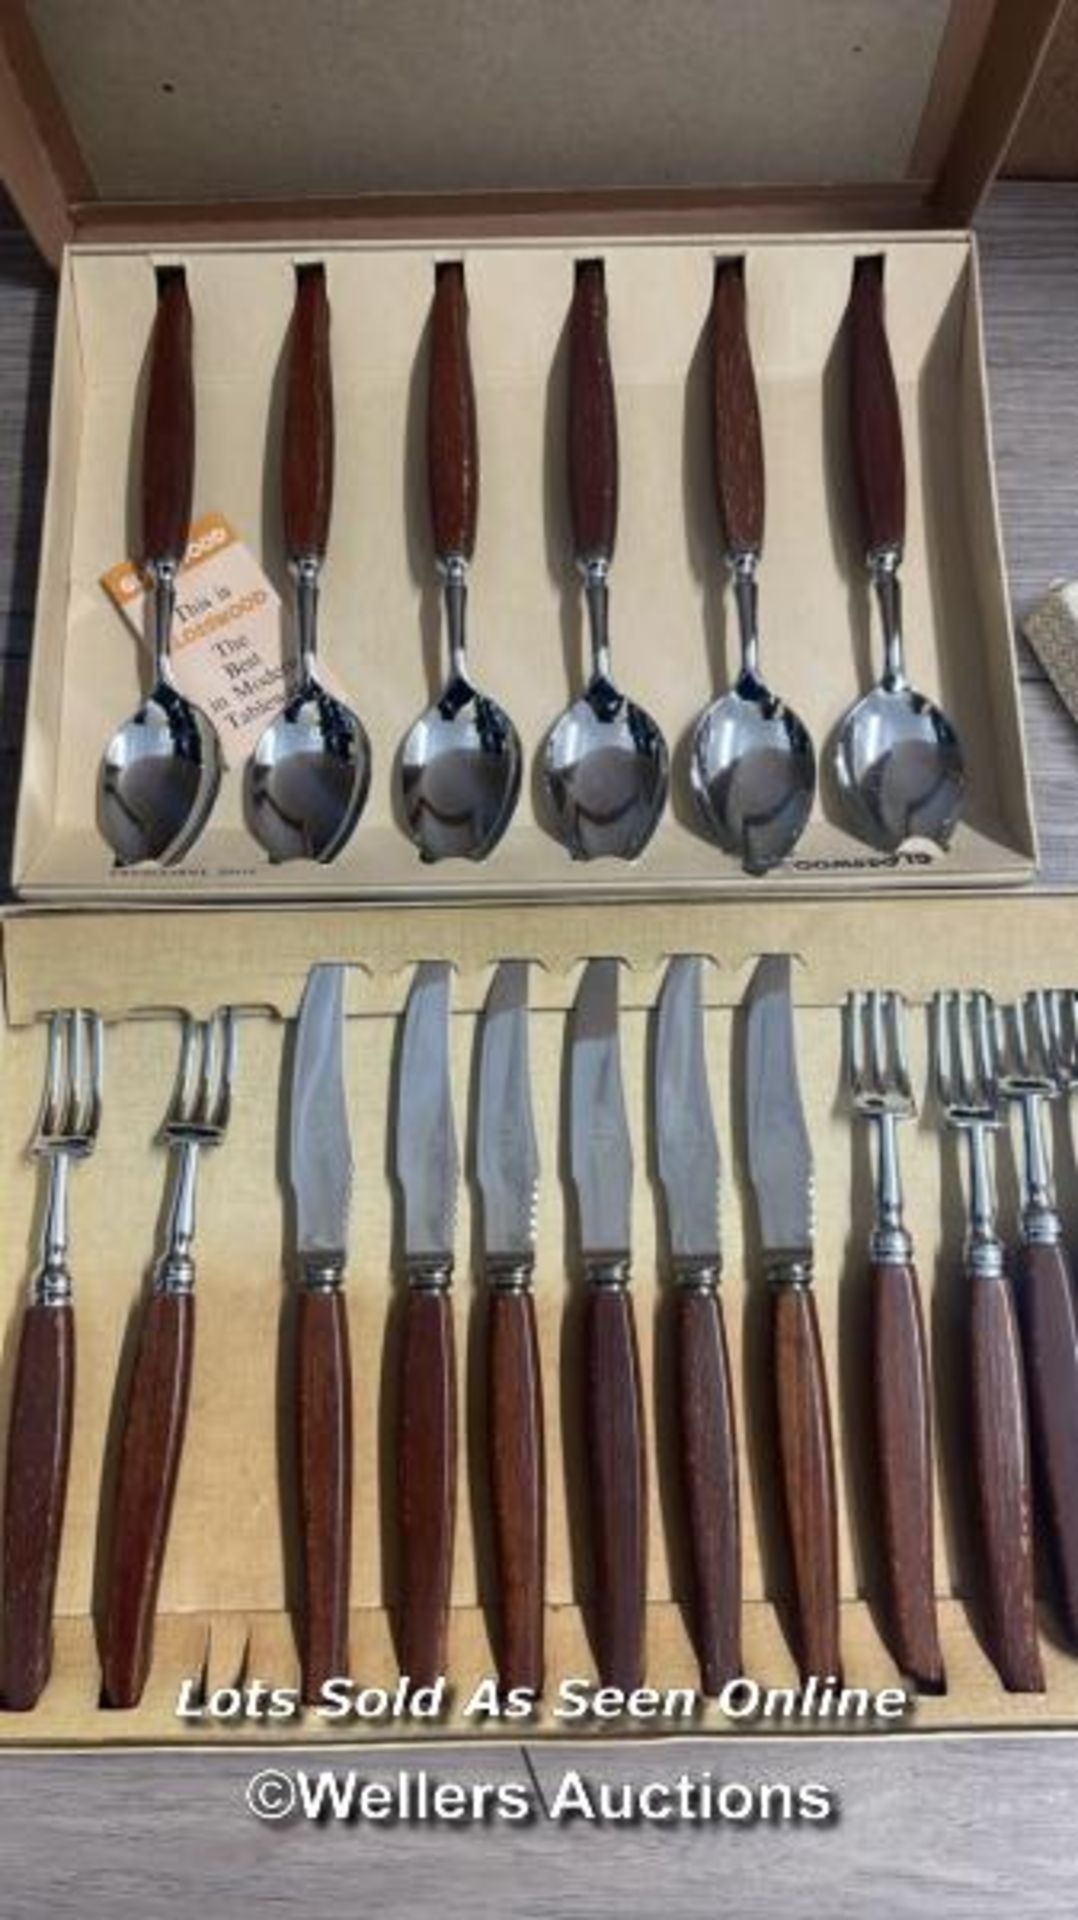 VINTAGE GLOSS WOOD CUTLERY MISSING ONE FORK